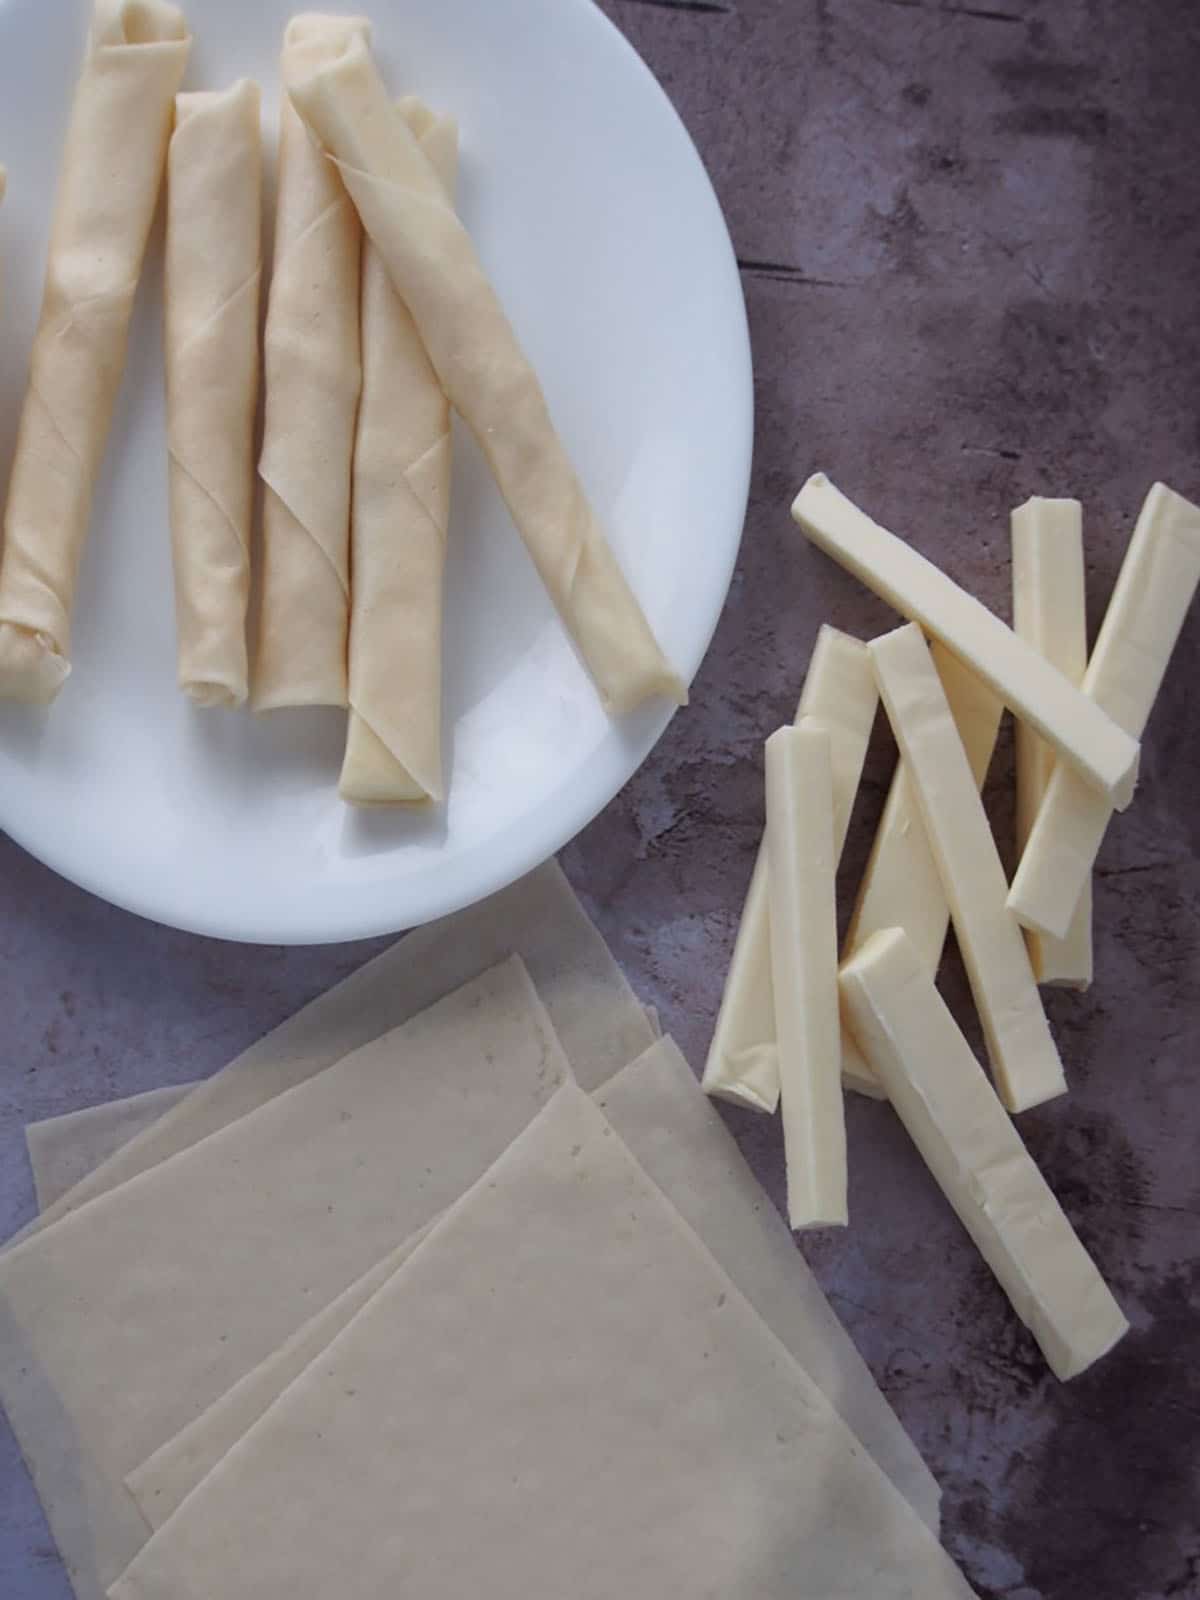 Eden cheese cut into sticks, spring roll wrappers